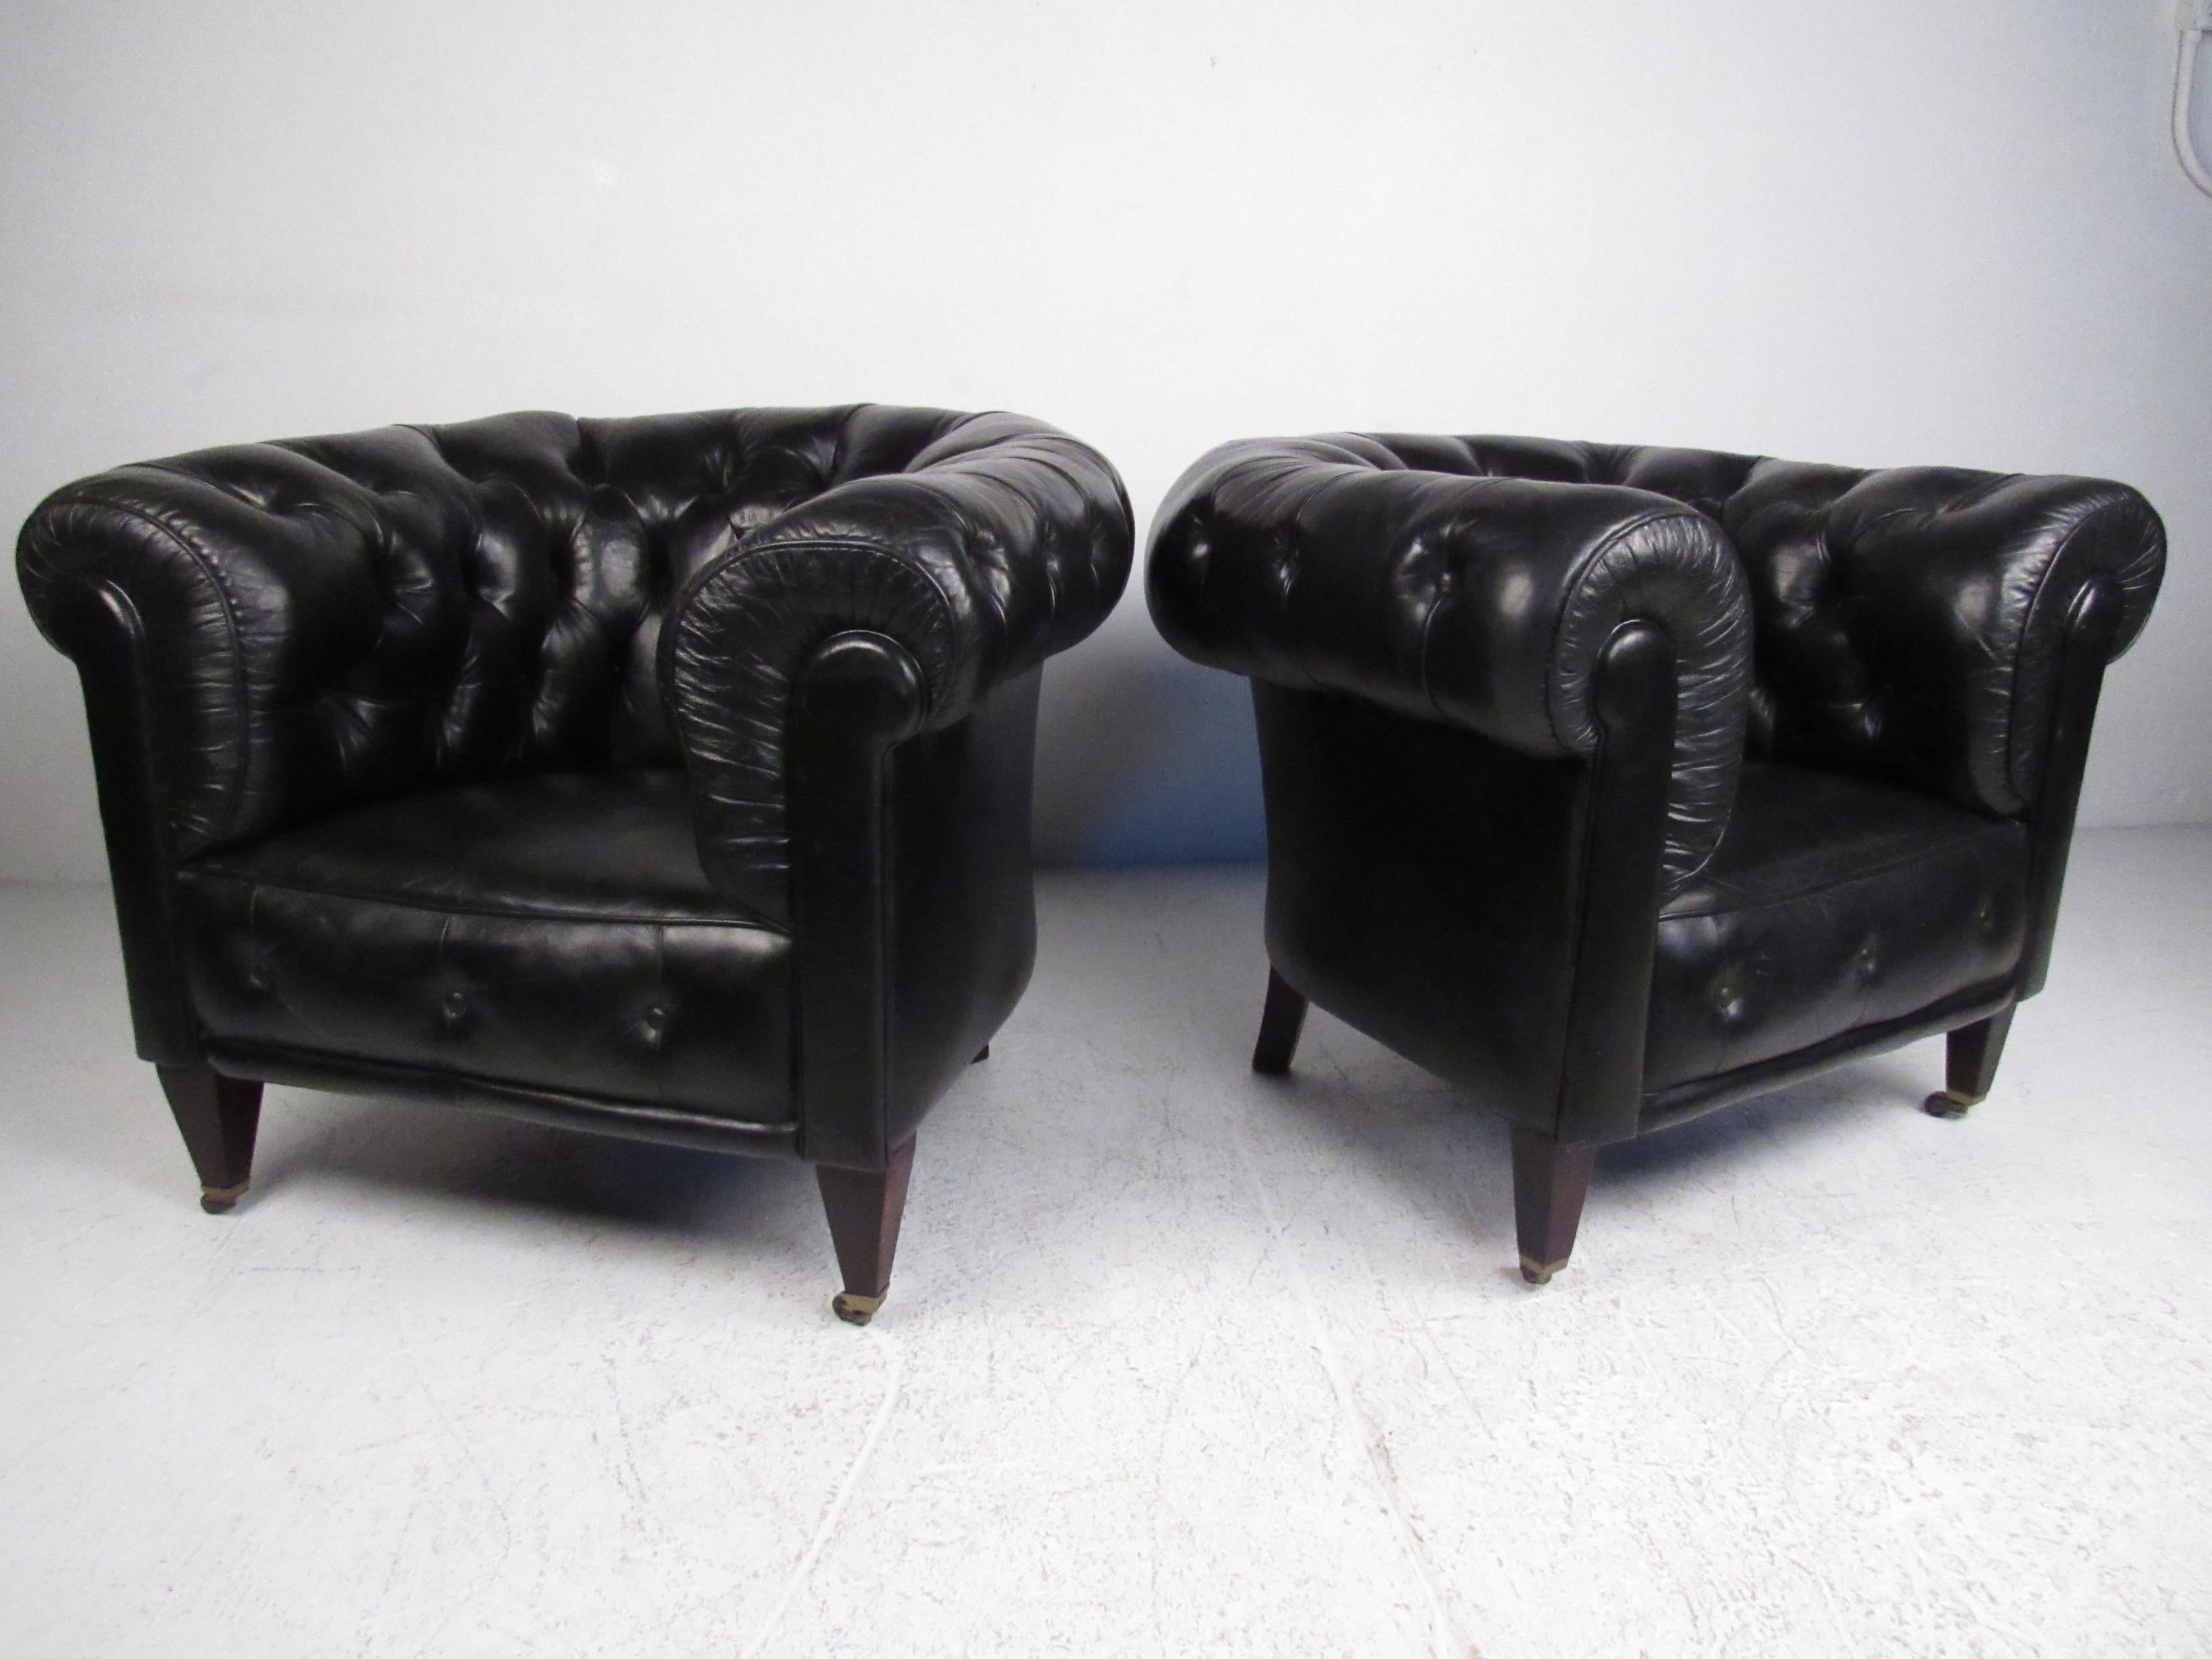 Pair of Vintage Leather Chesterfield Club Chairs 1